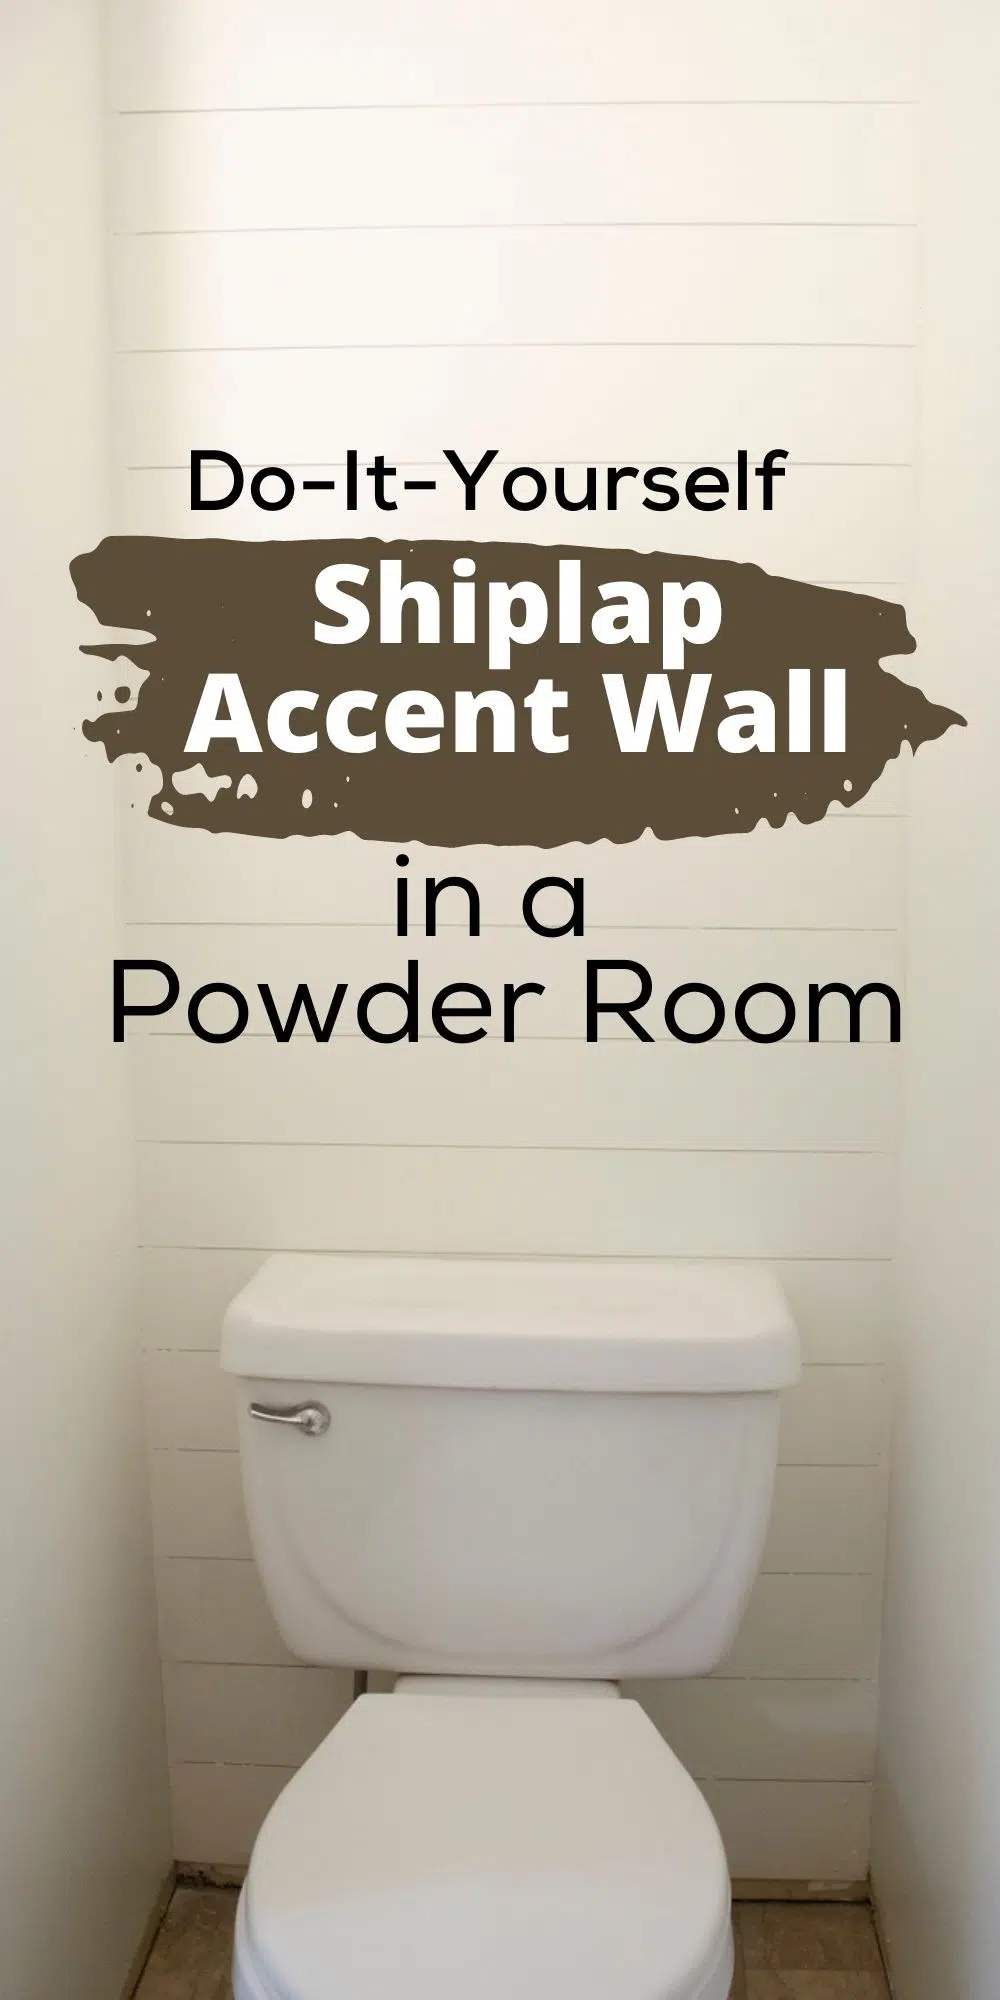 Shiplap accent wall in a powder room bathroom with a toilet in front of it.